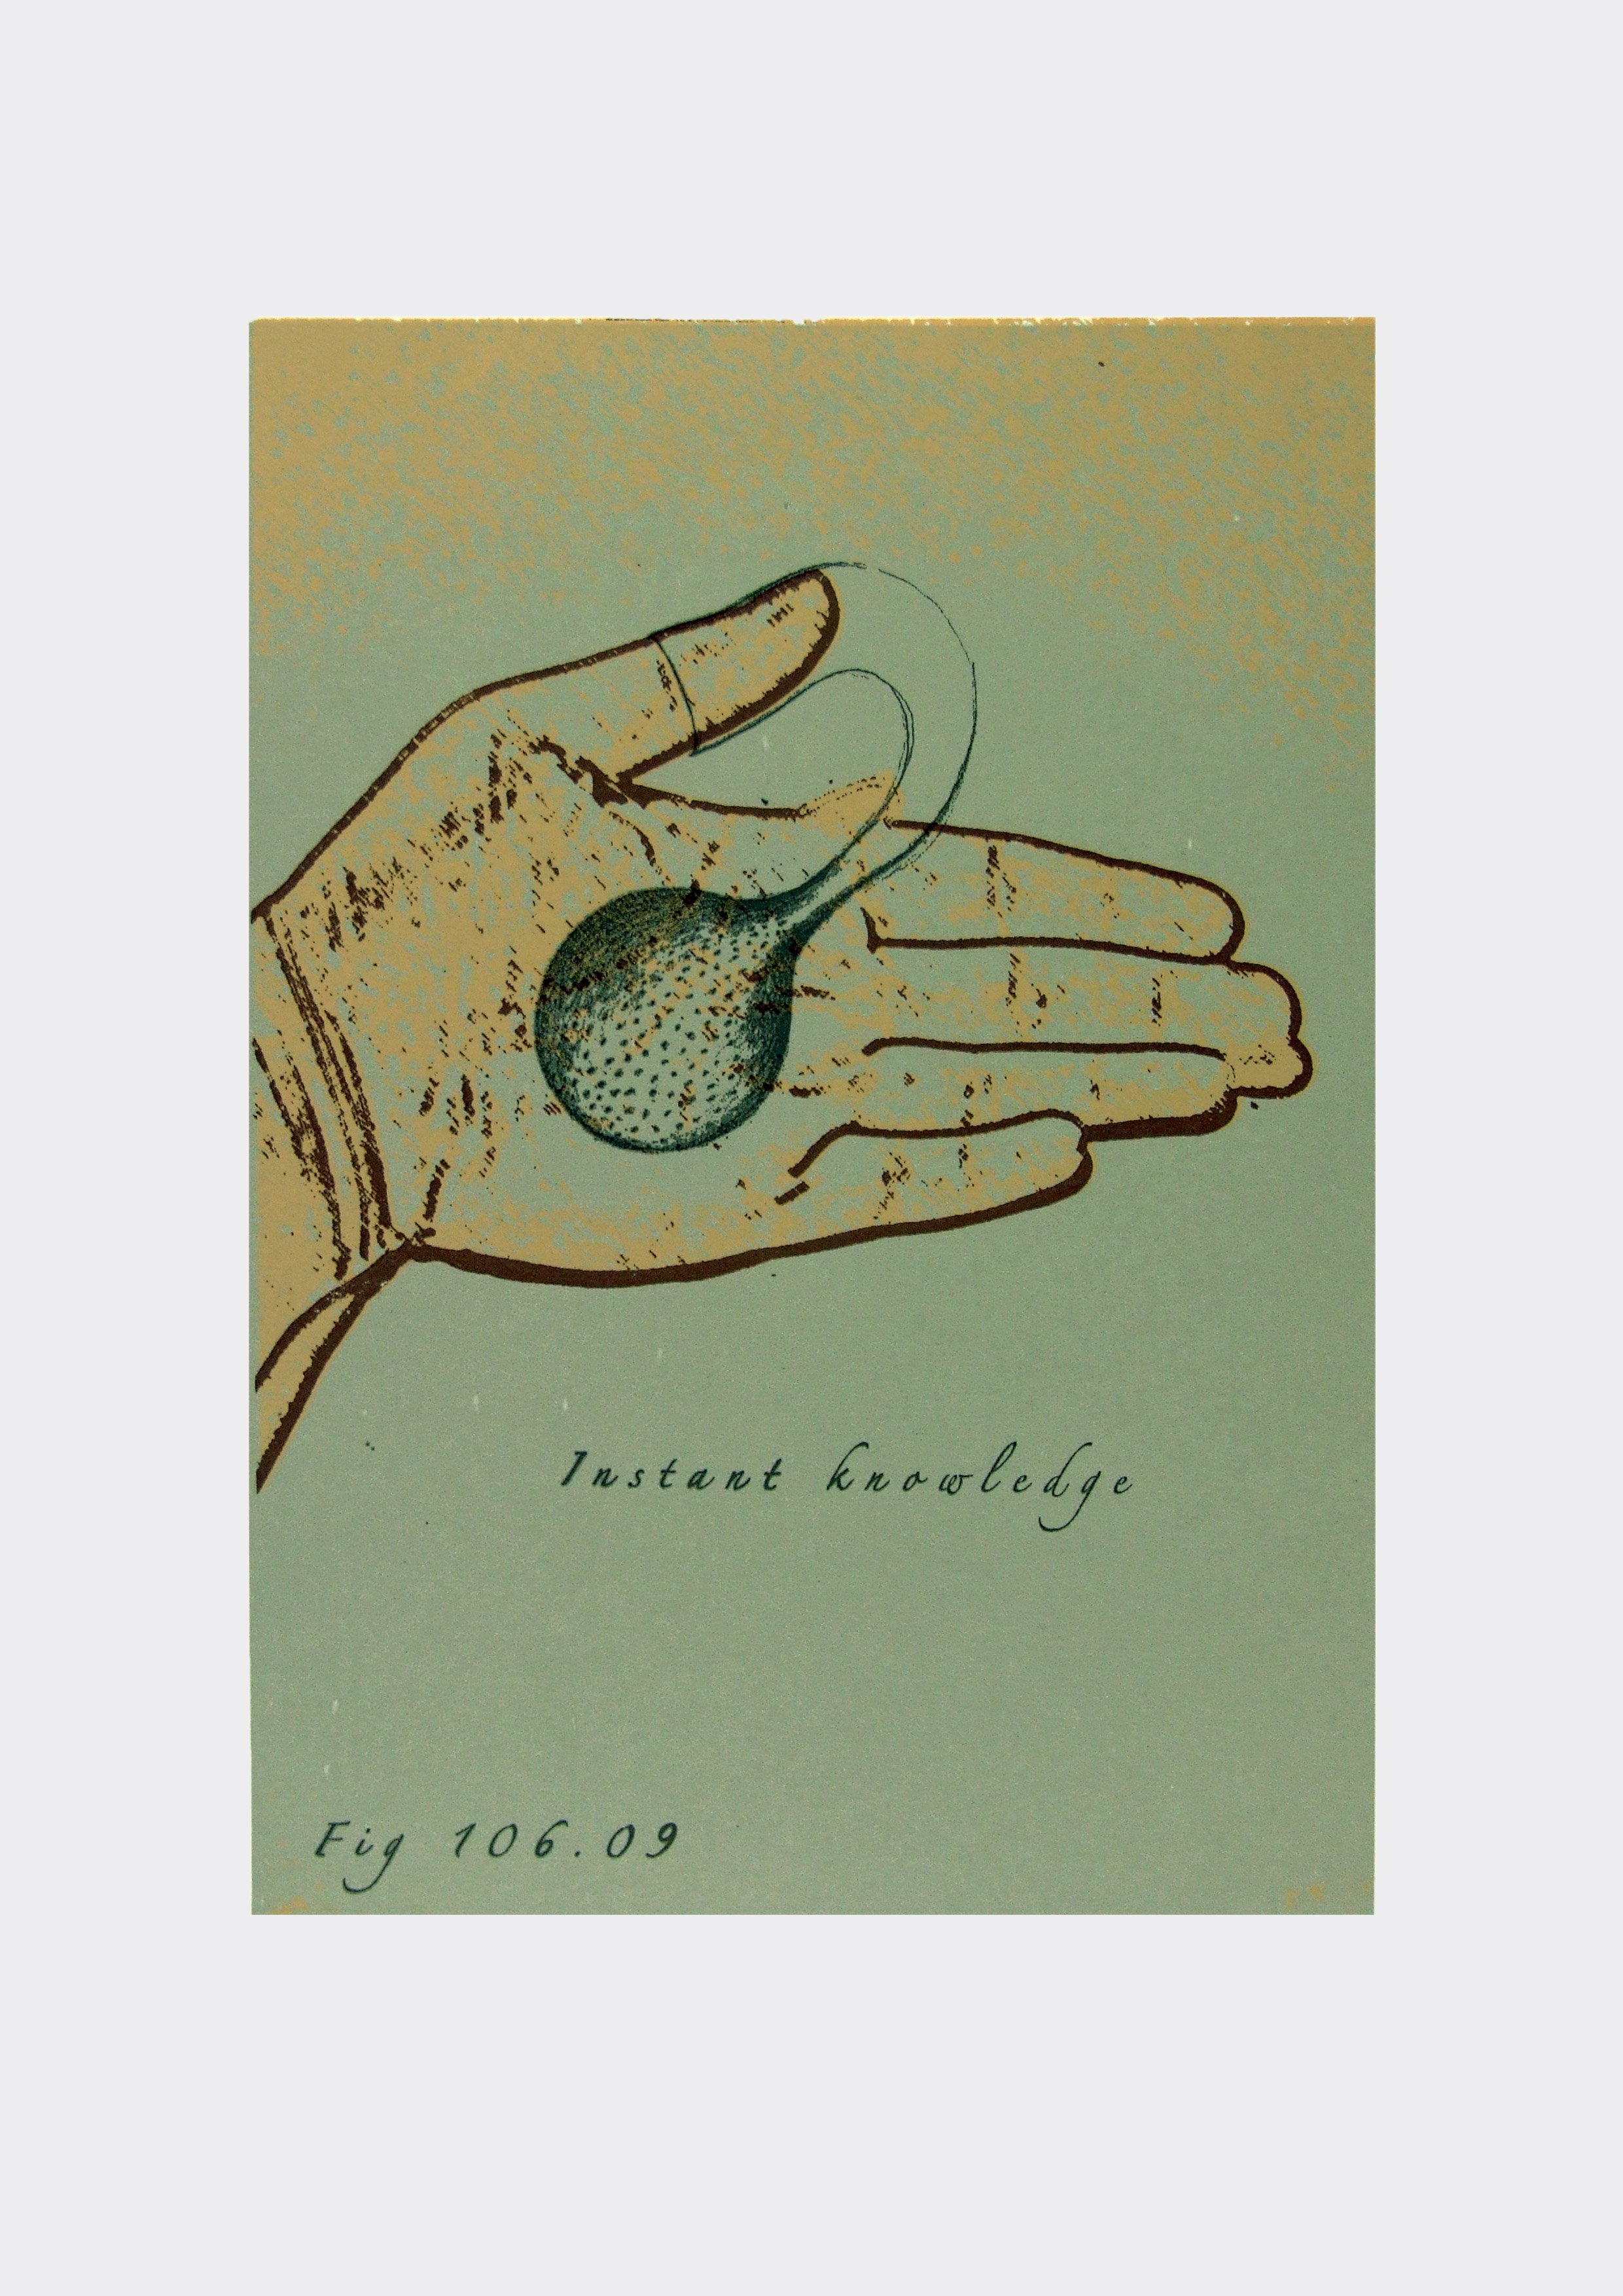    From The Book of Instant Knowledge; Fig. 106.9  , 2007, silk screen print, limited, varied edition of 10 